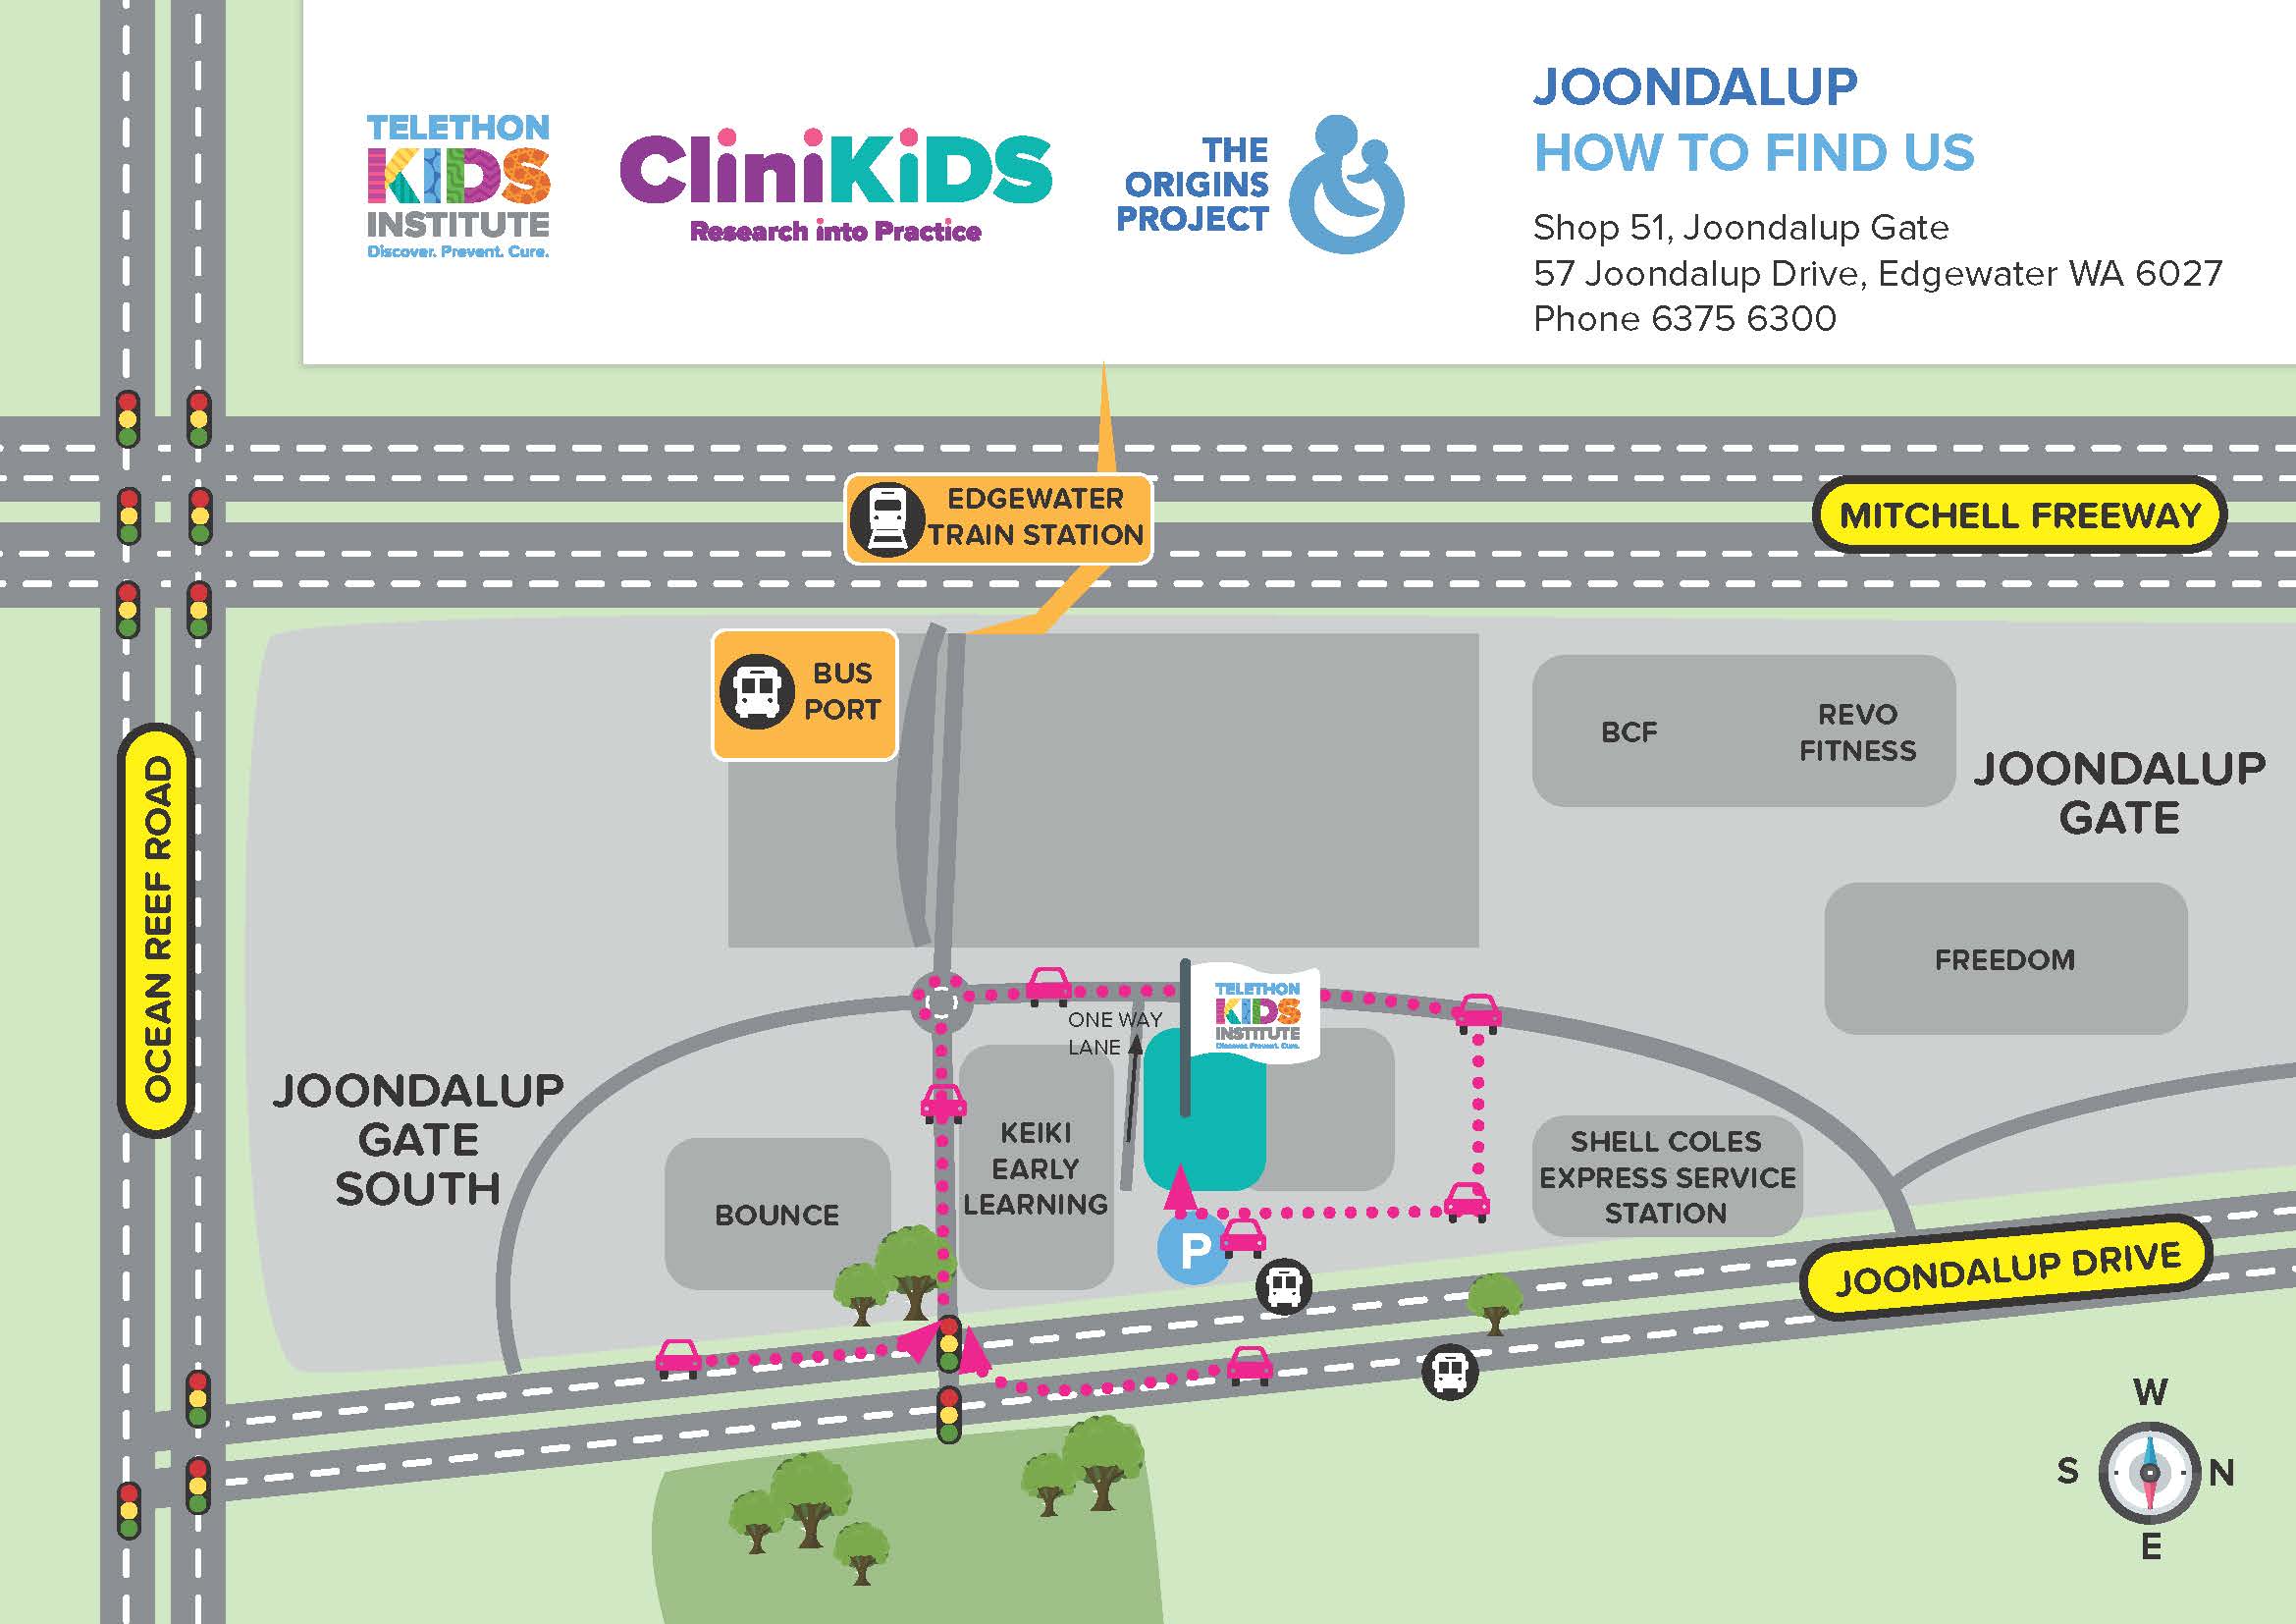 Telethon Kids Institute Joondalup site map - families